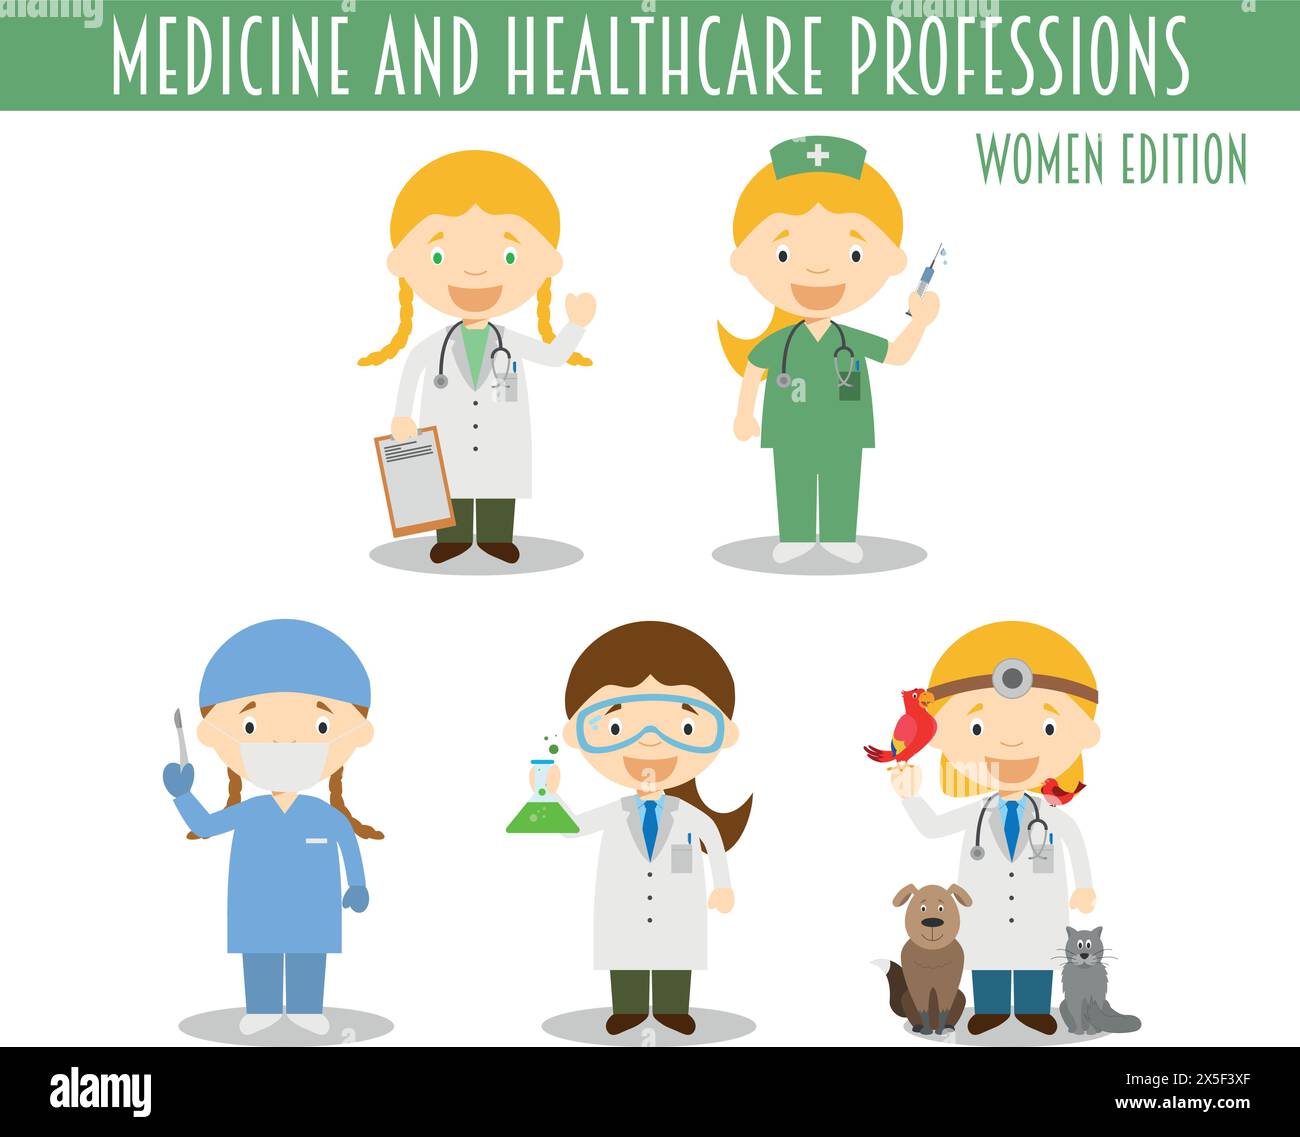 Vector Set of Medicine and Healthcare Professions in cartoon style. Women Edition. Stock Vector